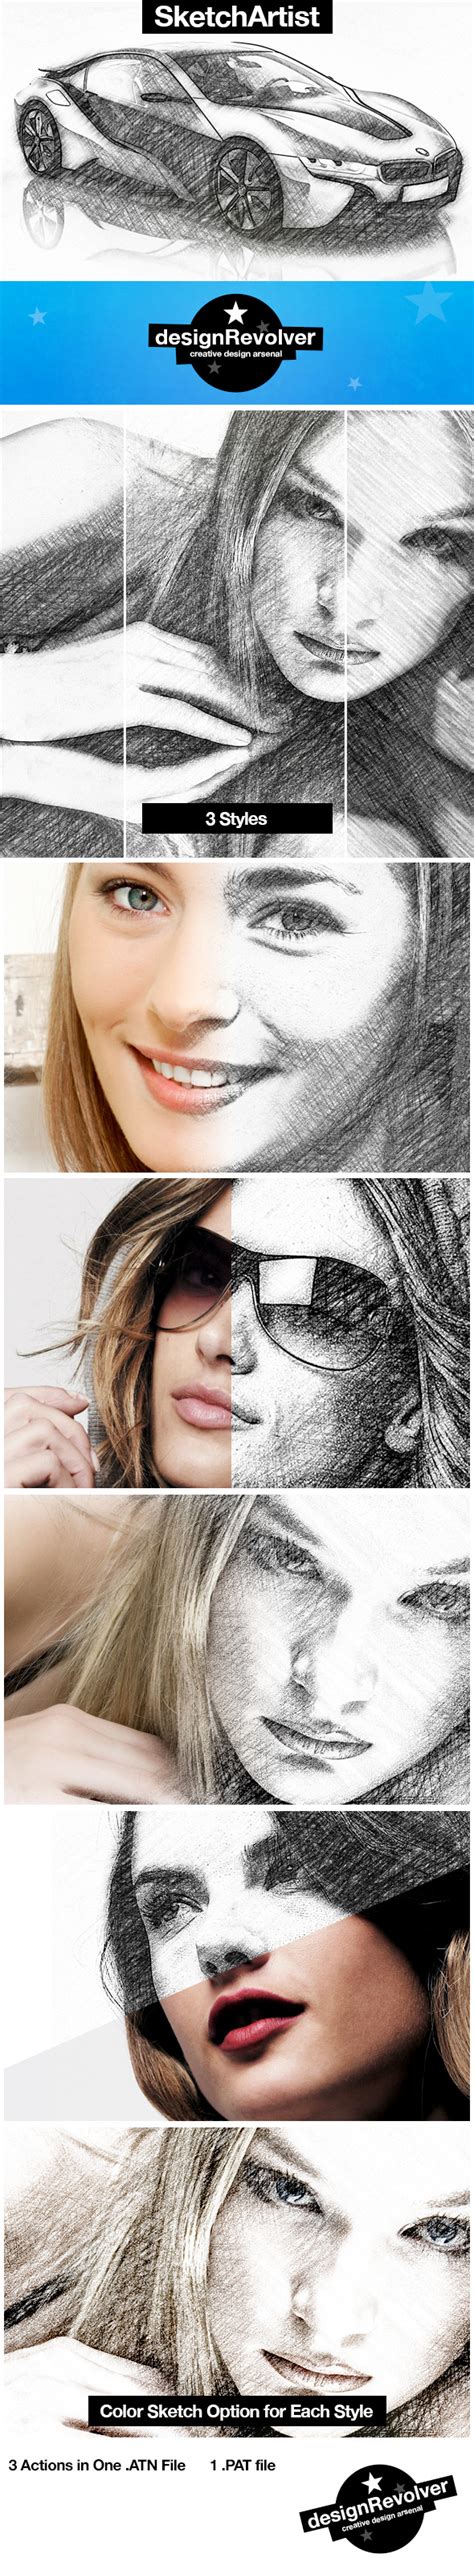 Realistic Sketch Effects Premium Photoshop Actions